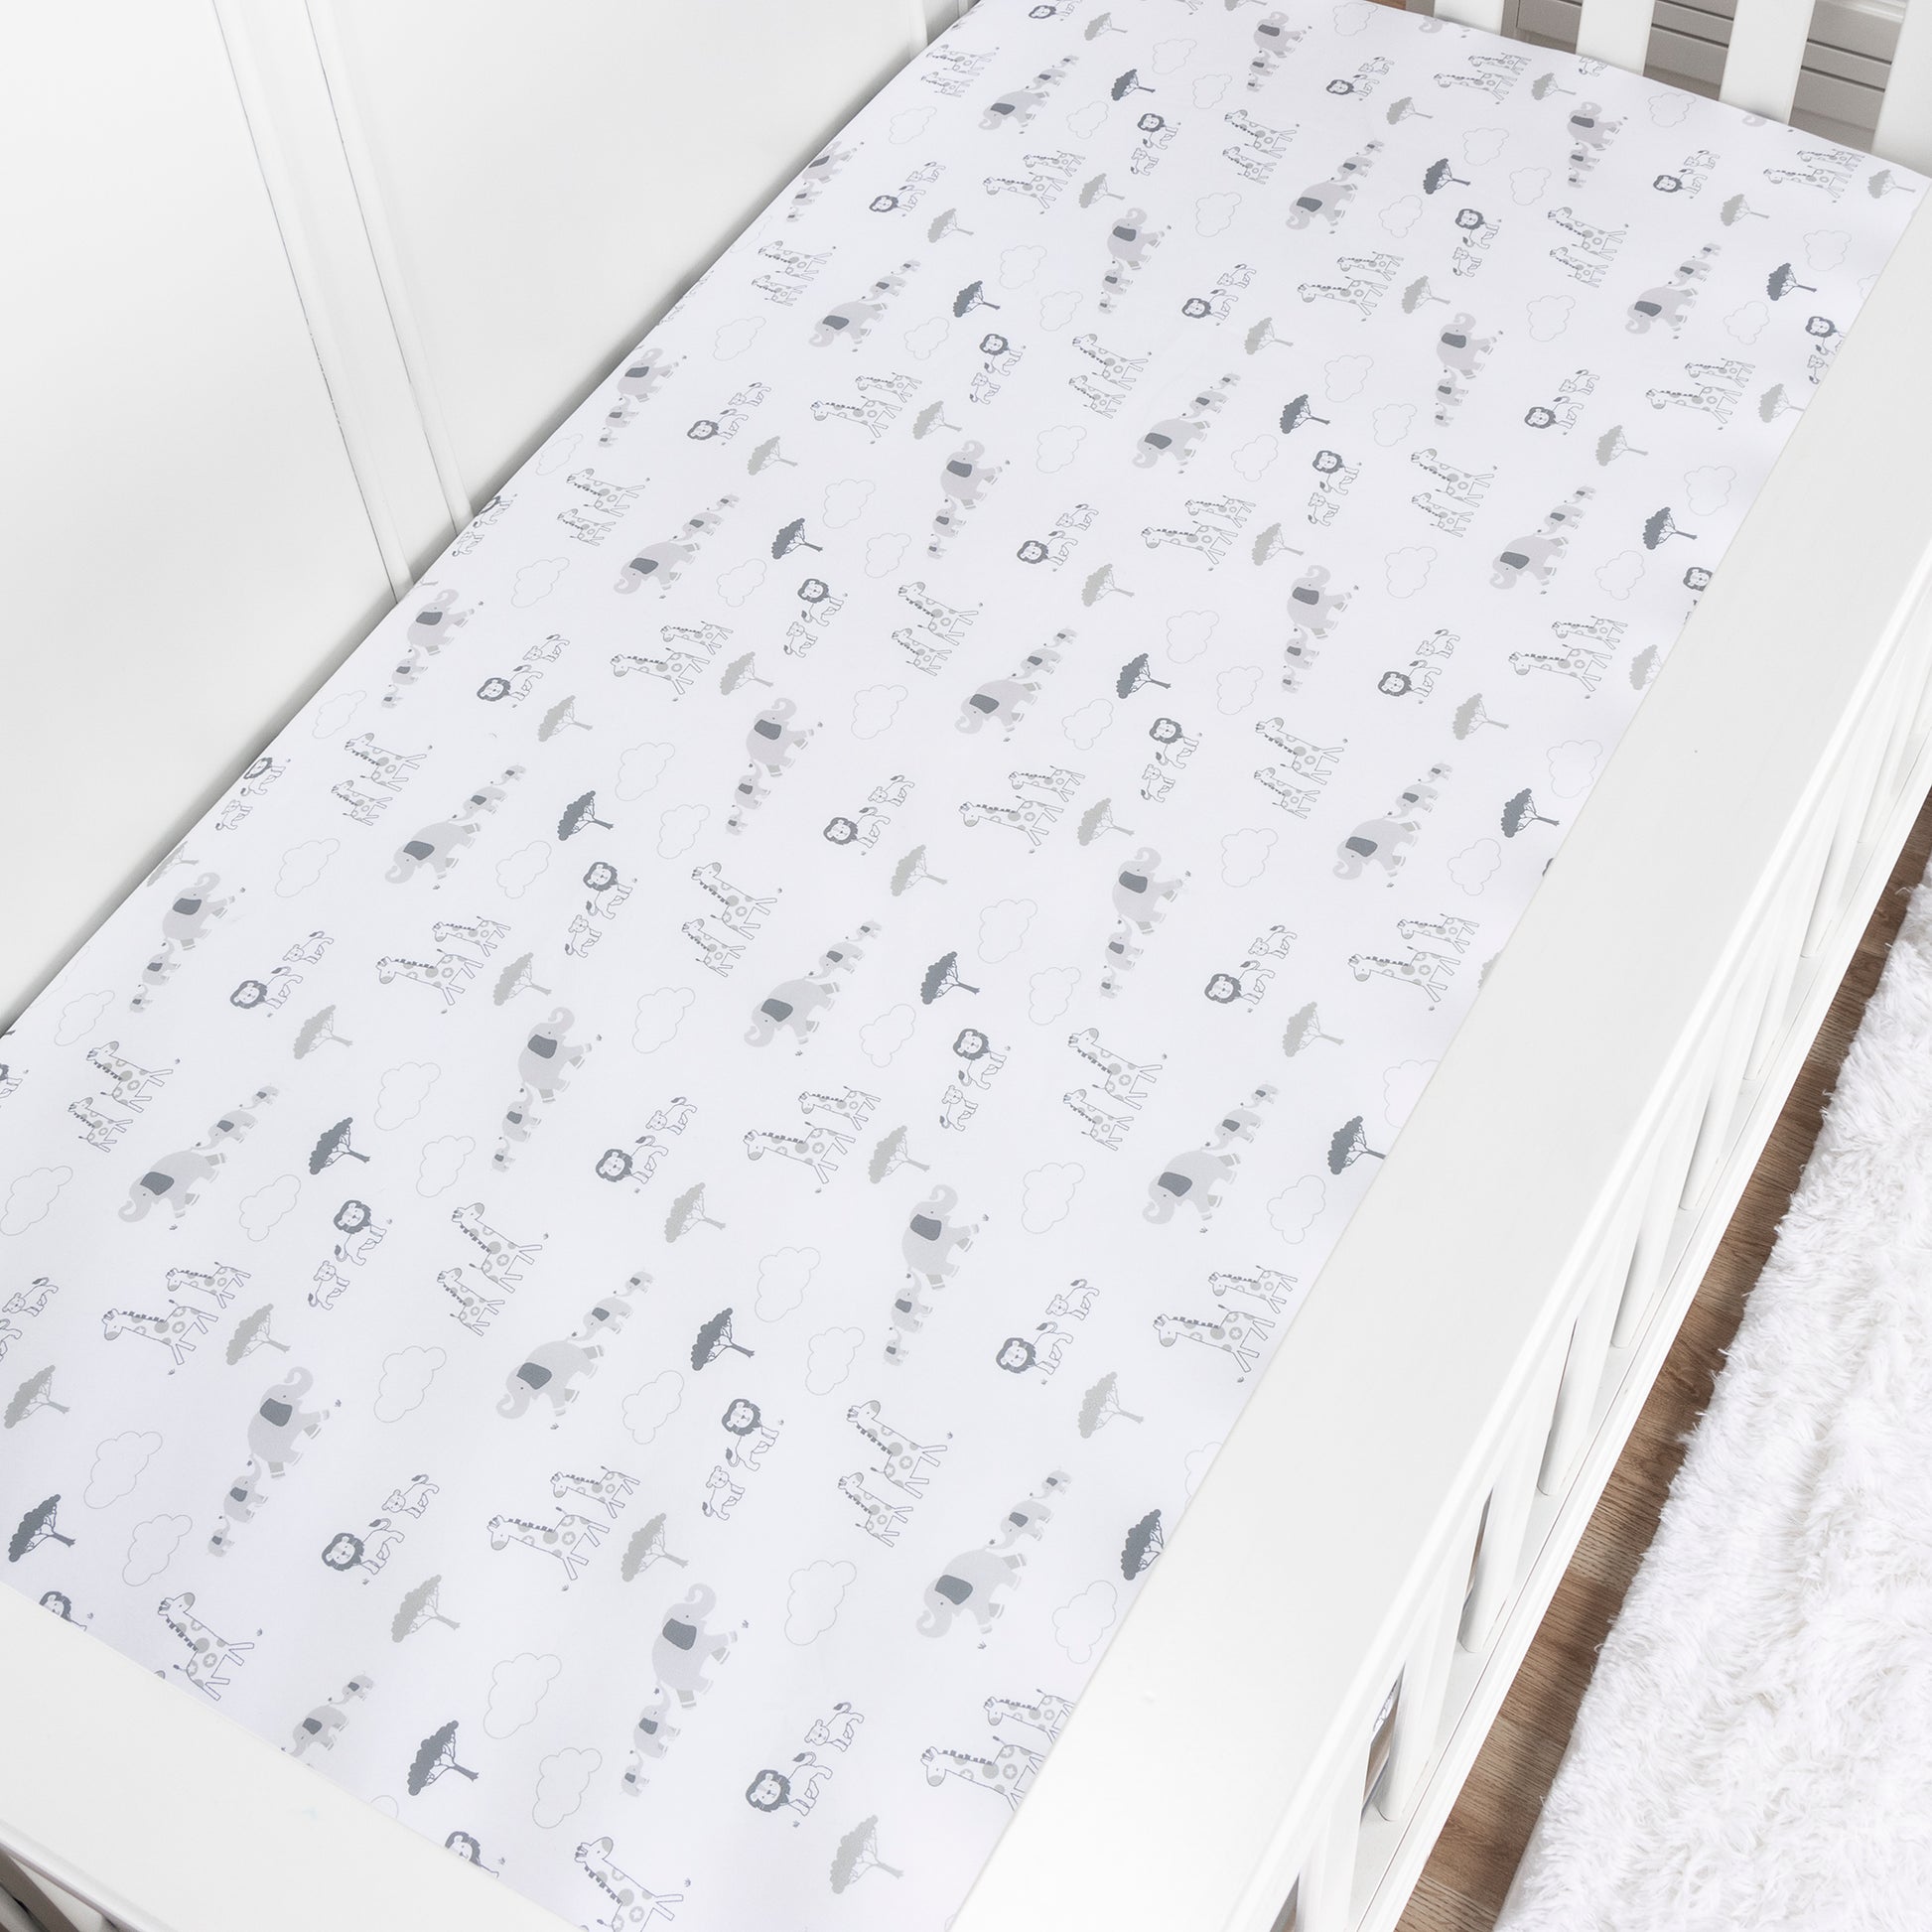 stylized in nursery image of follow the leader crib sheet featured on a white crib